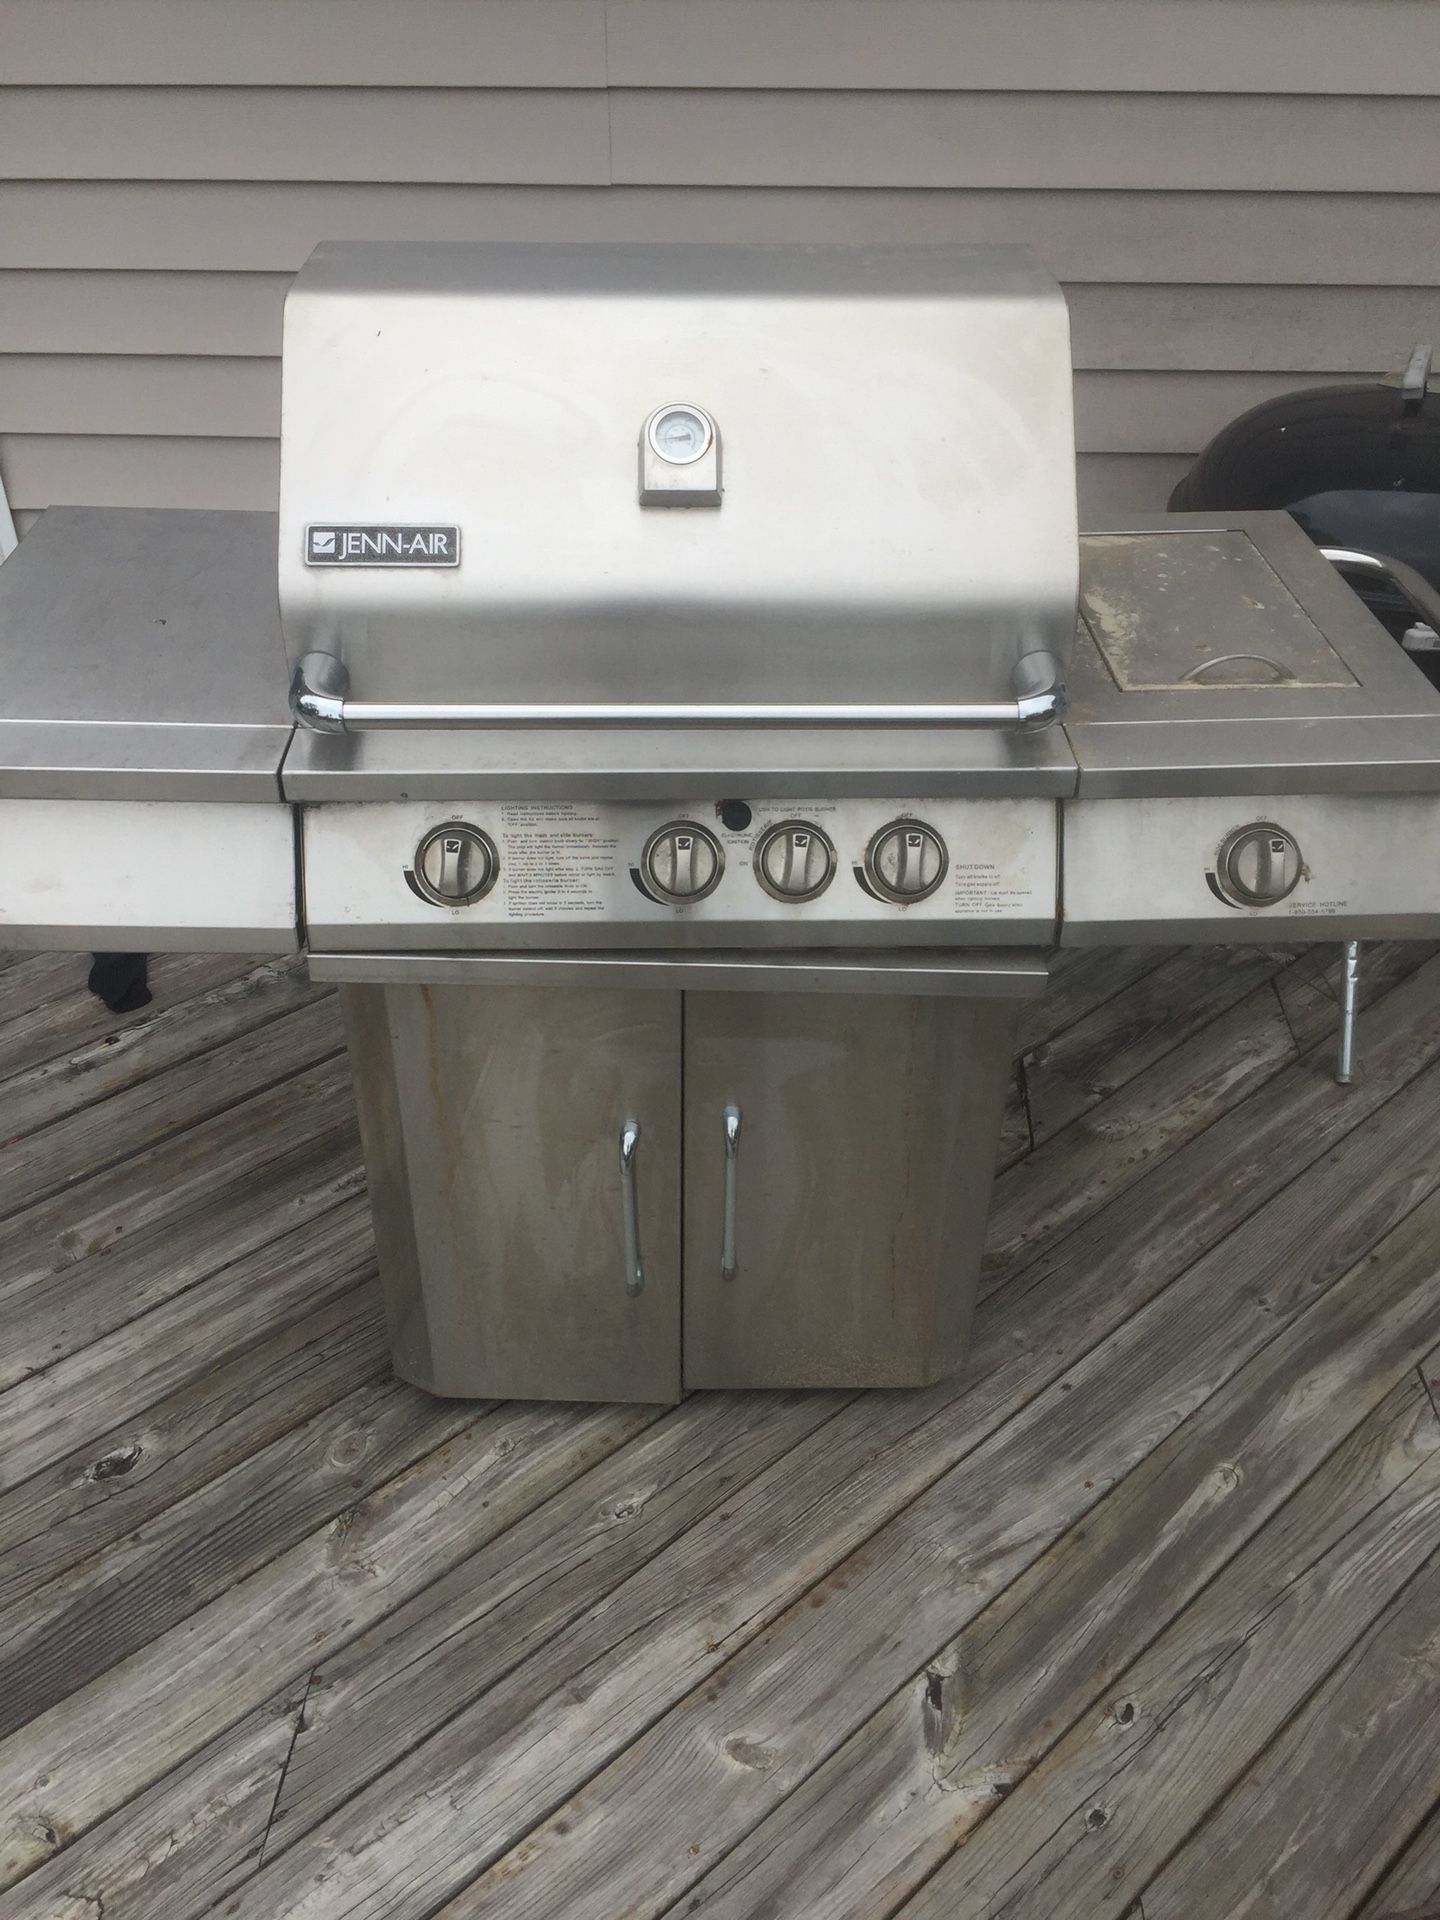 Jenn air stainless steel gas grill